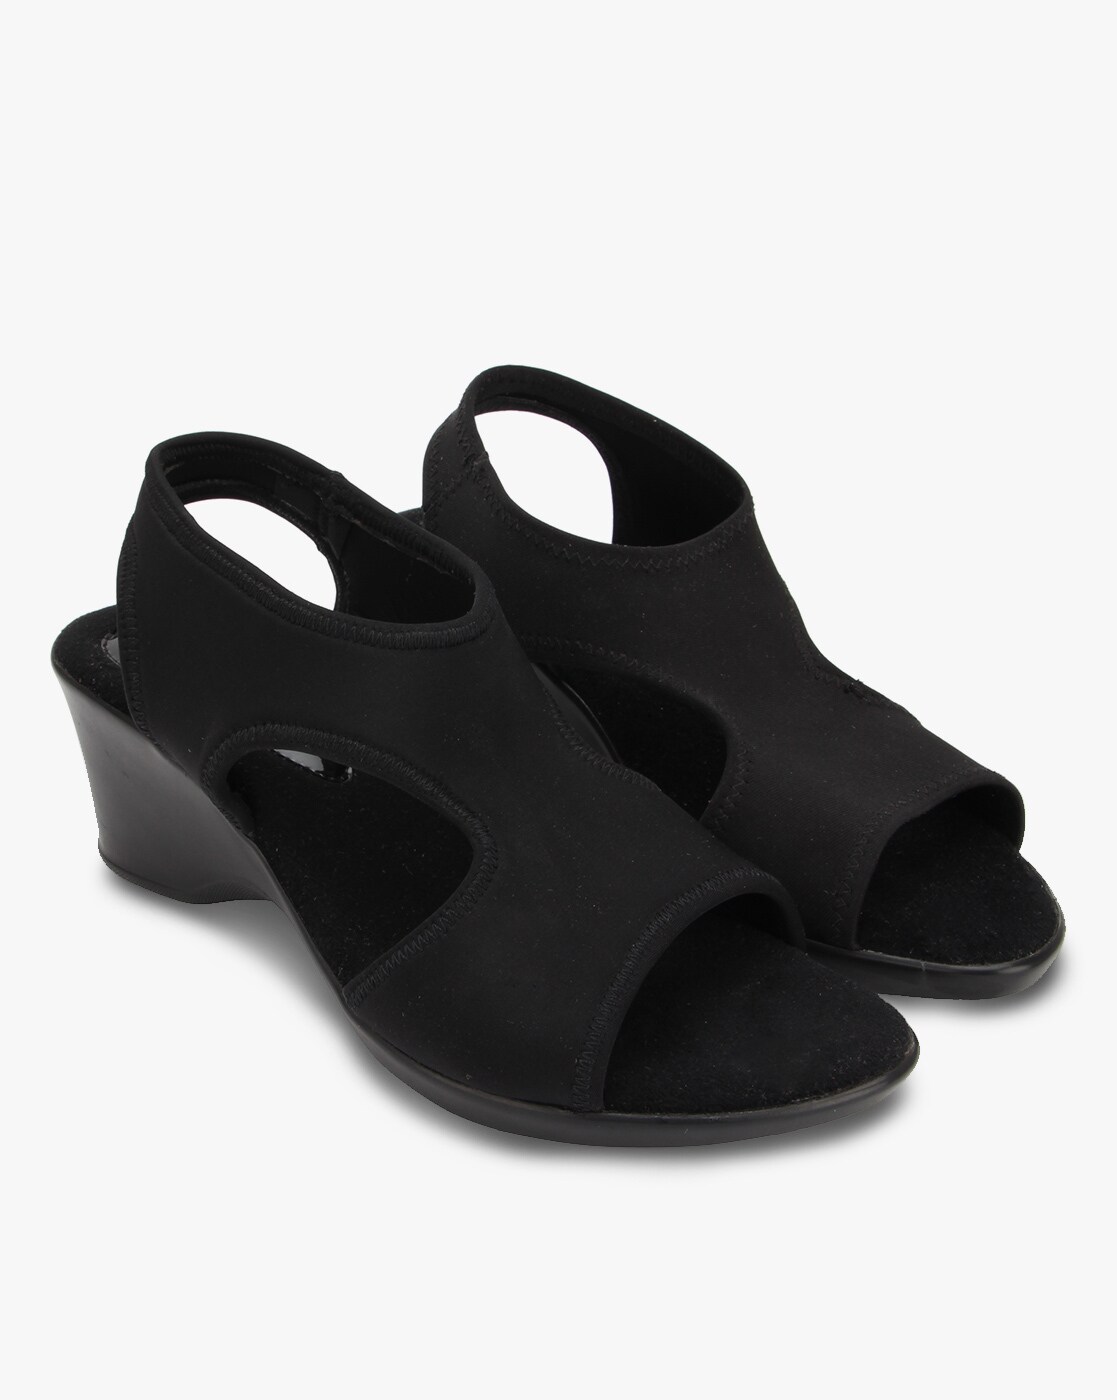 Peep-Toe Wedges with Cutouts